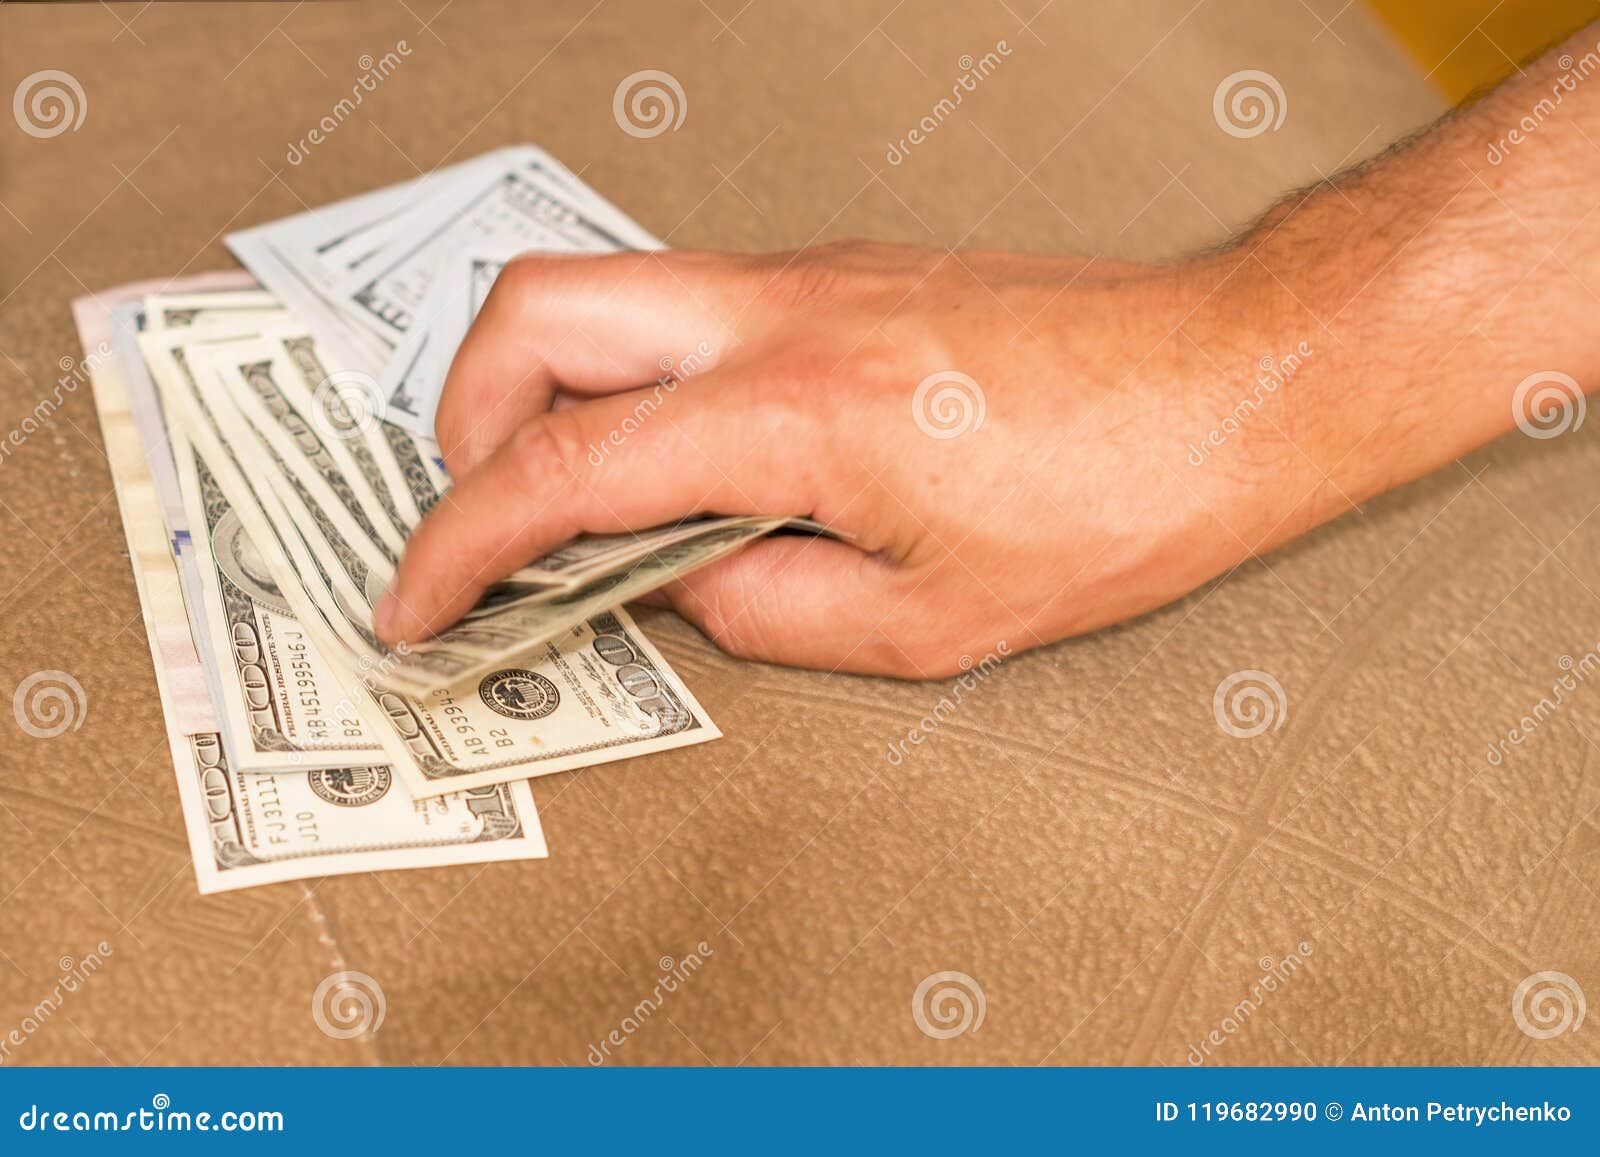 hands with money hide them under mattress. a man`s hand takes money from under the pillow. a man hides money in a bed